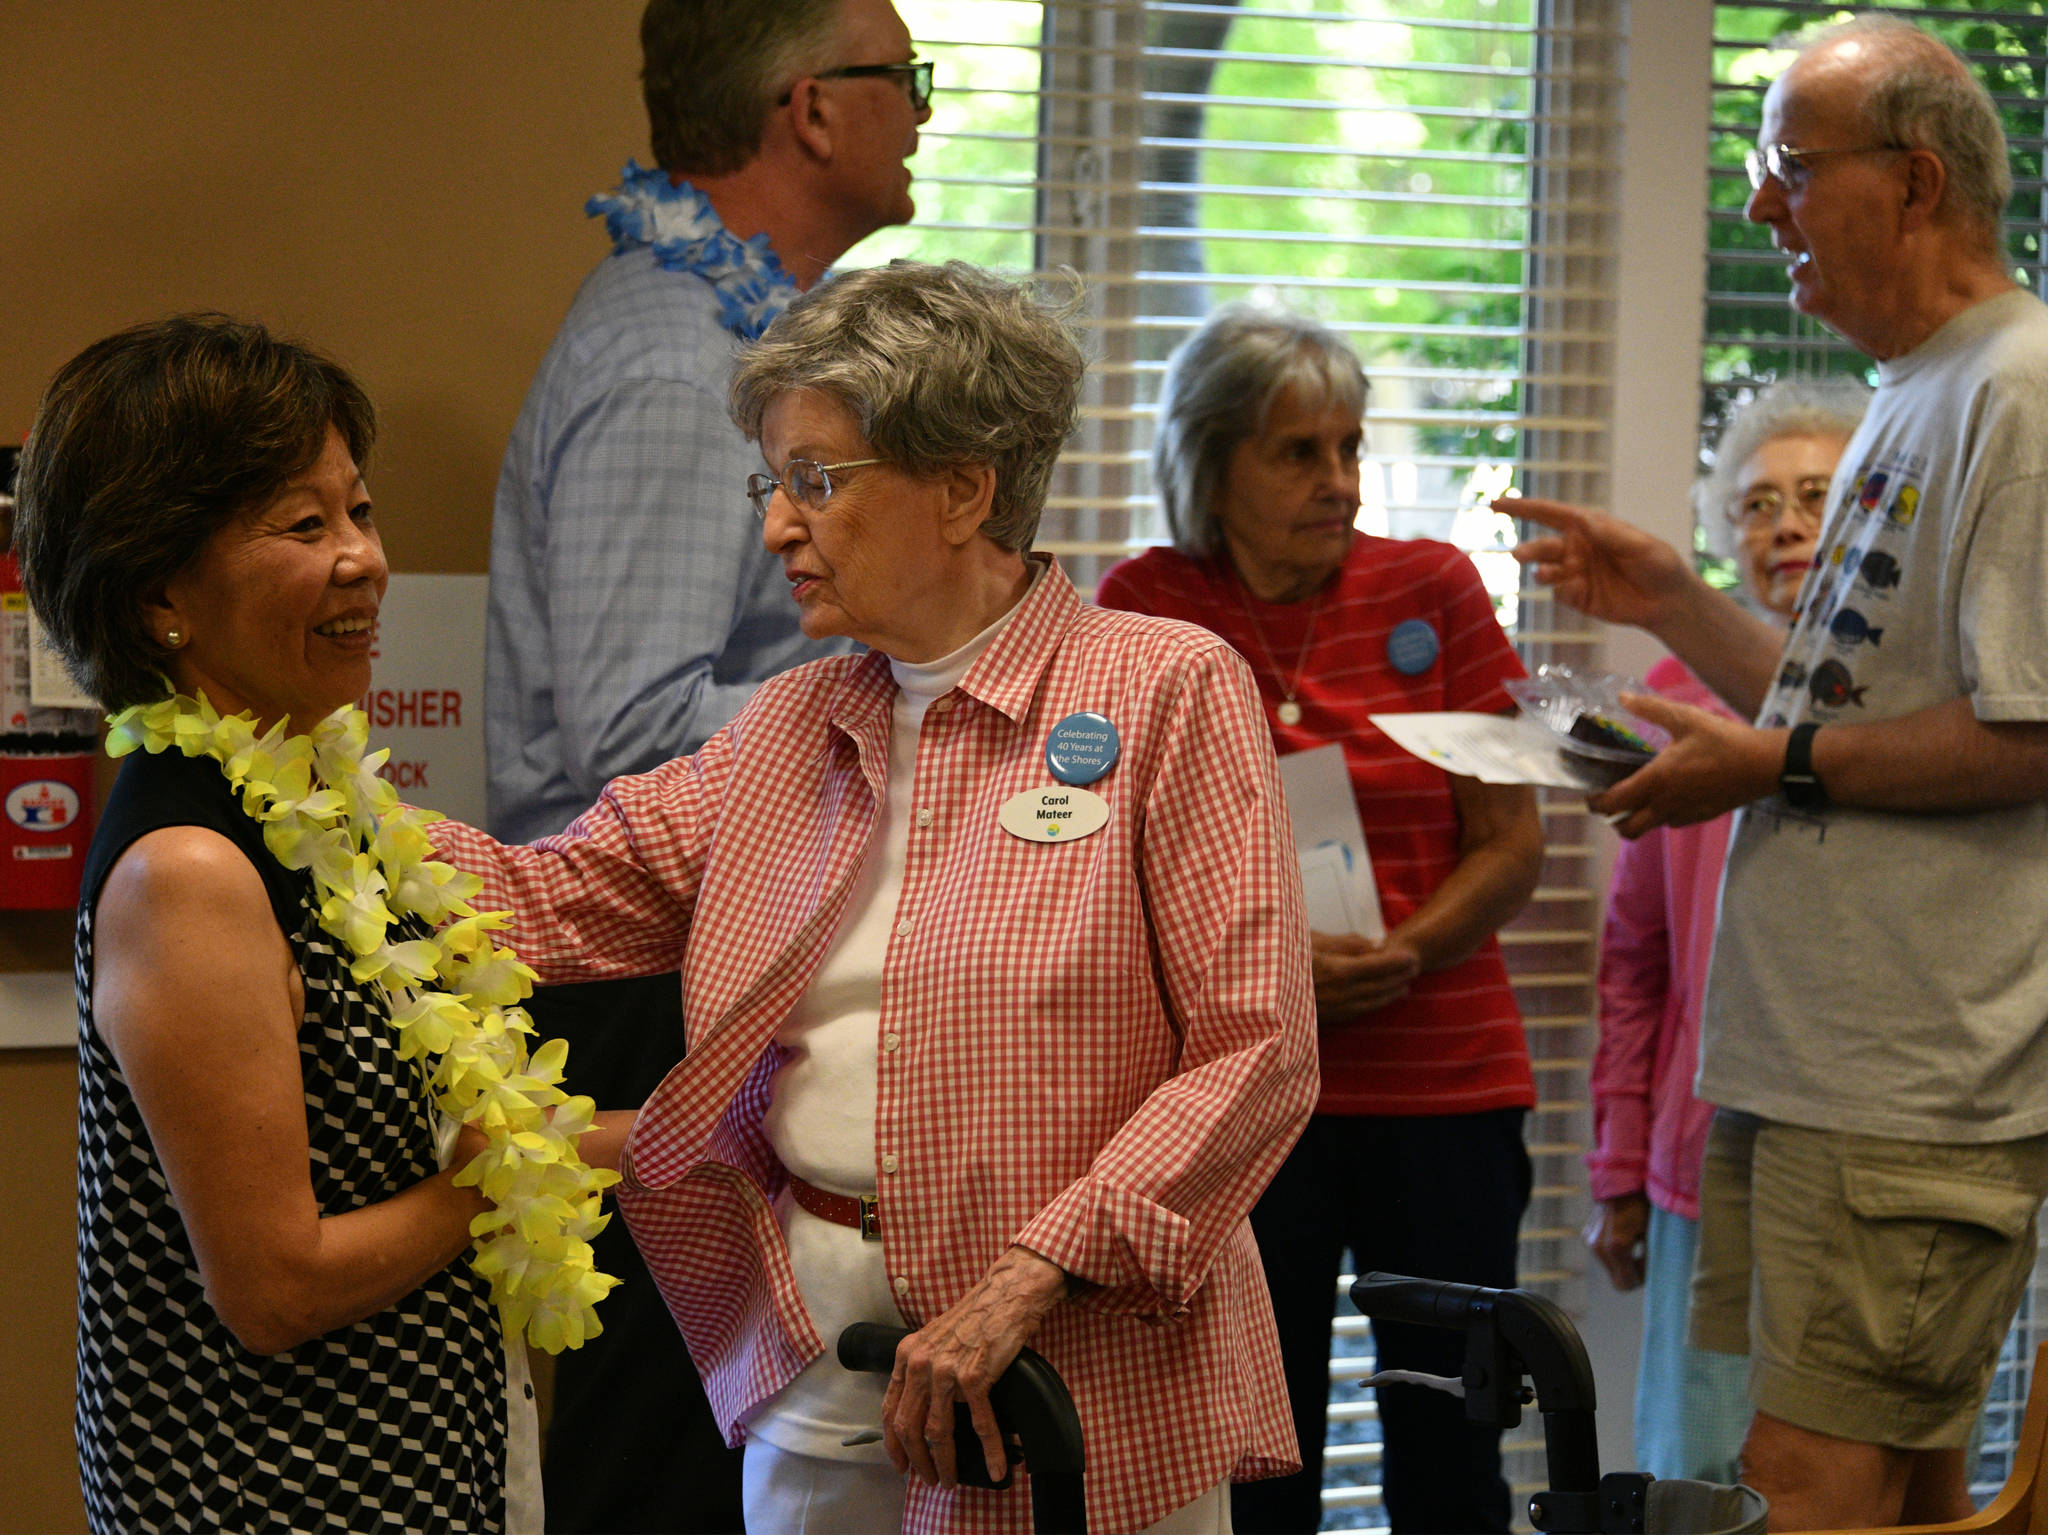 Former administrator Anne Arakaki Lock, left, visits with resident Carol Mateer at the Covenant Living at the Shores 40th anniversary celebration on June 21. Andy Nystrom/ staff photo